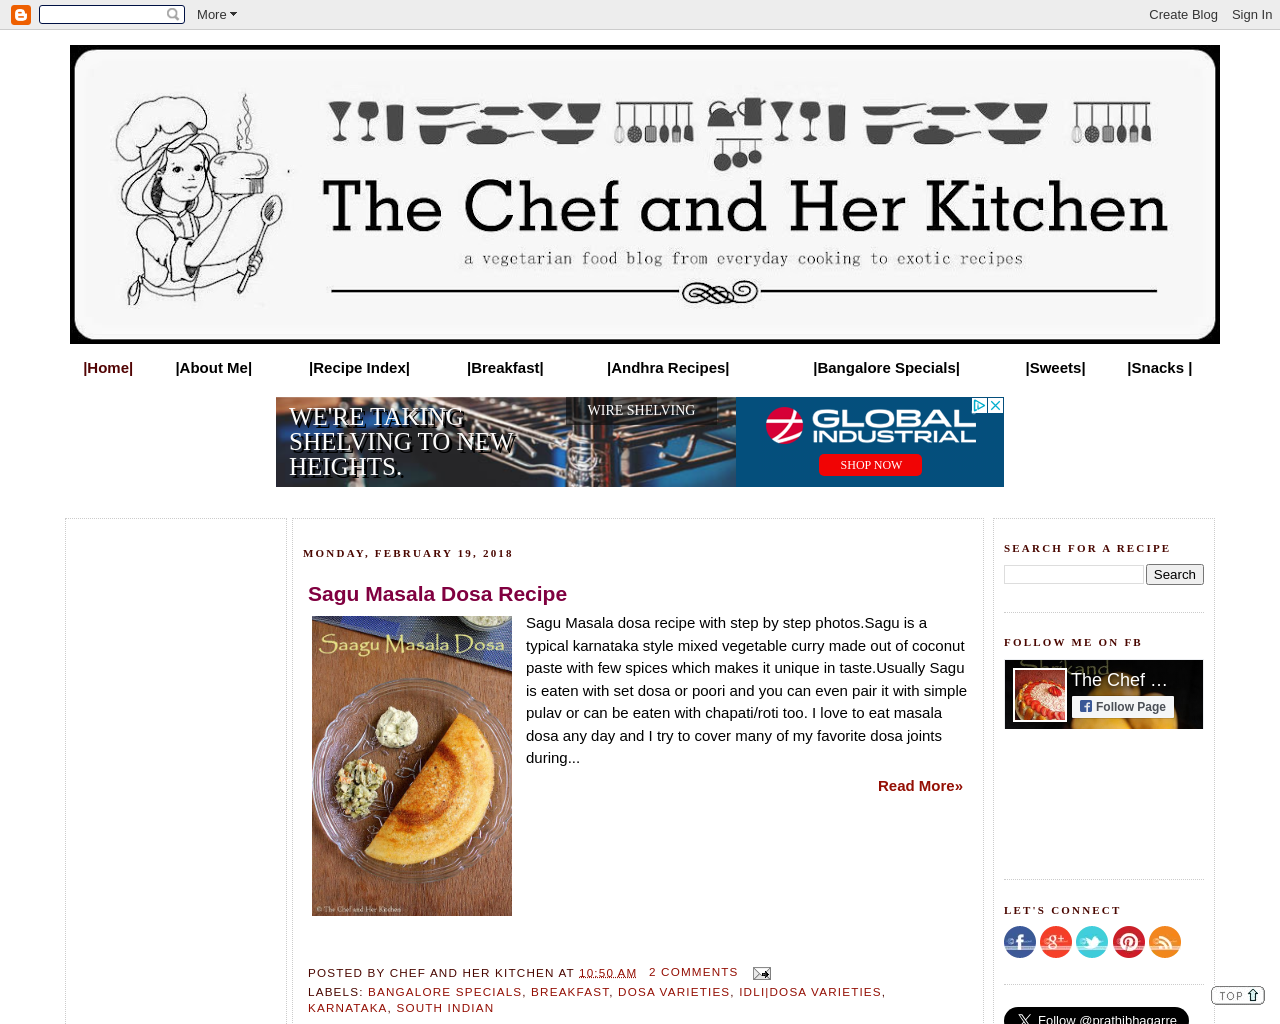 The Chef and Her Kitchen